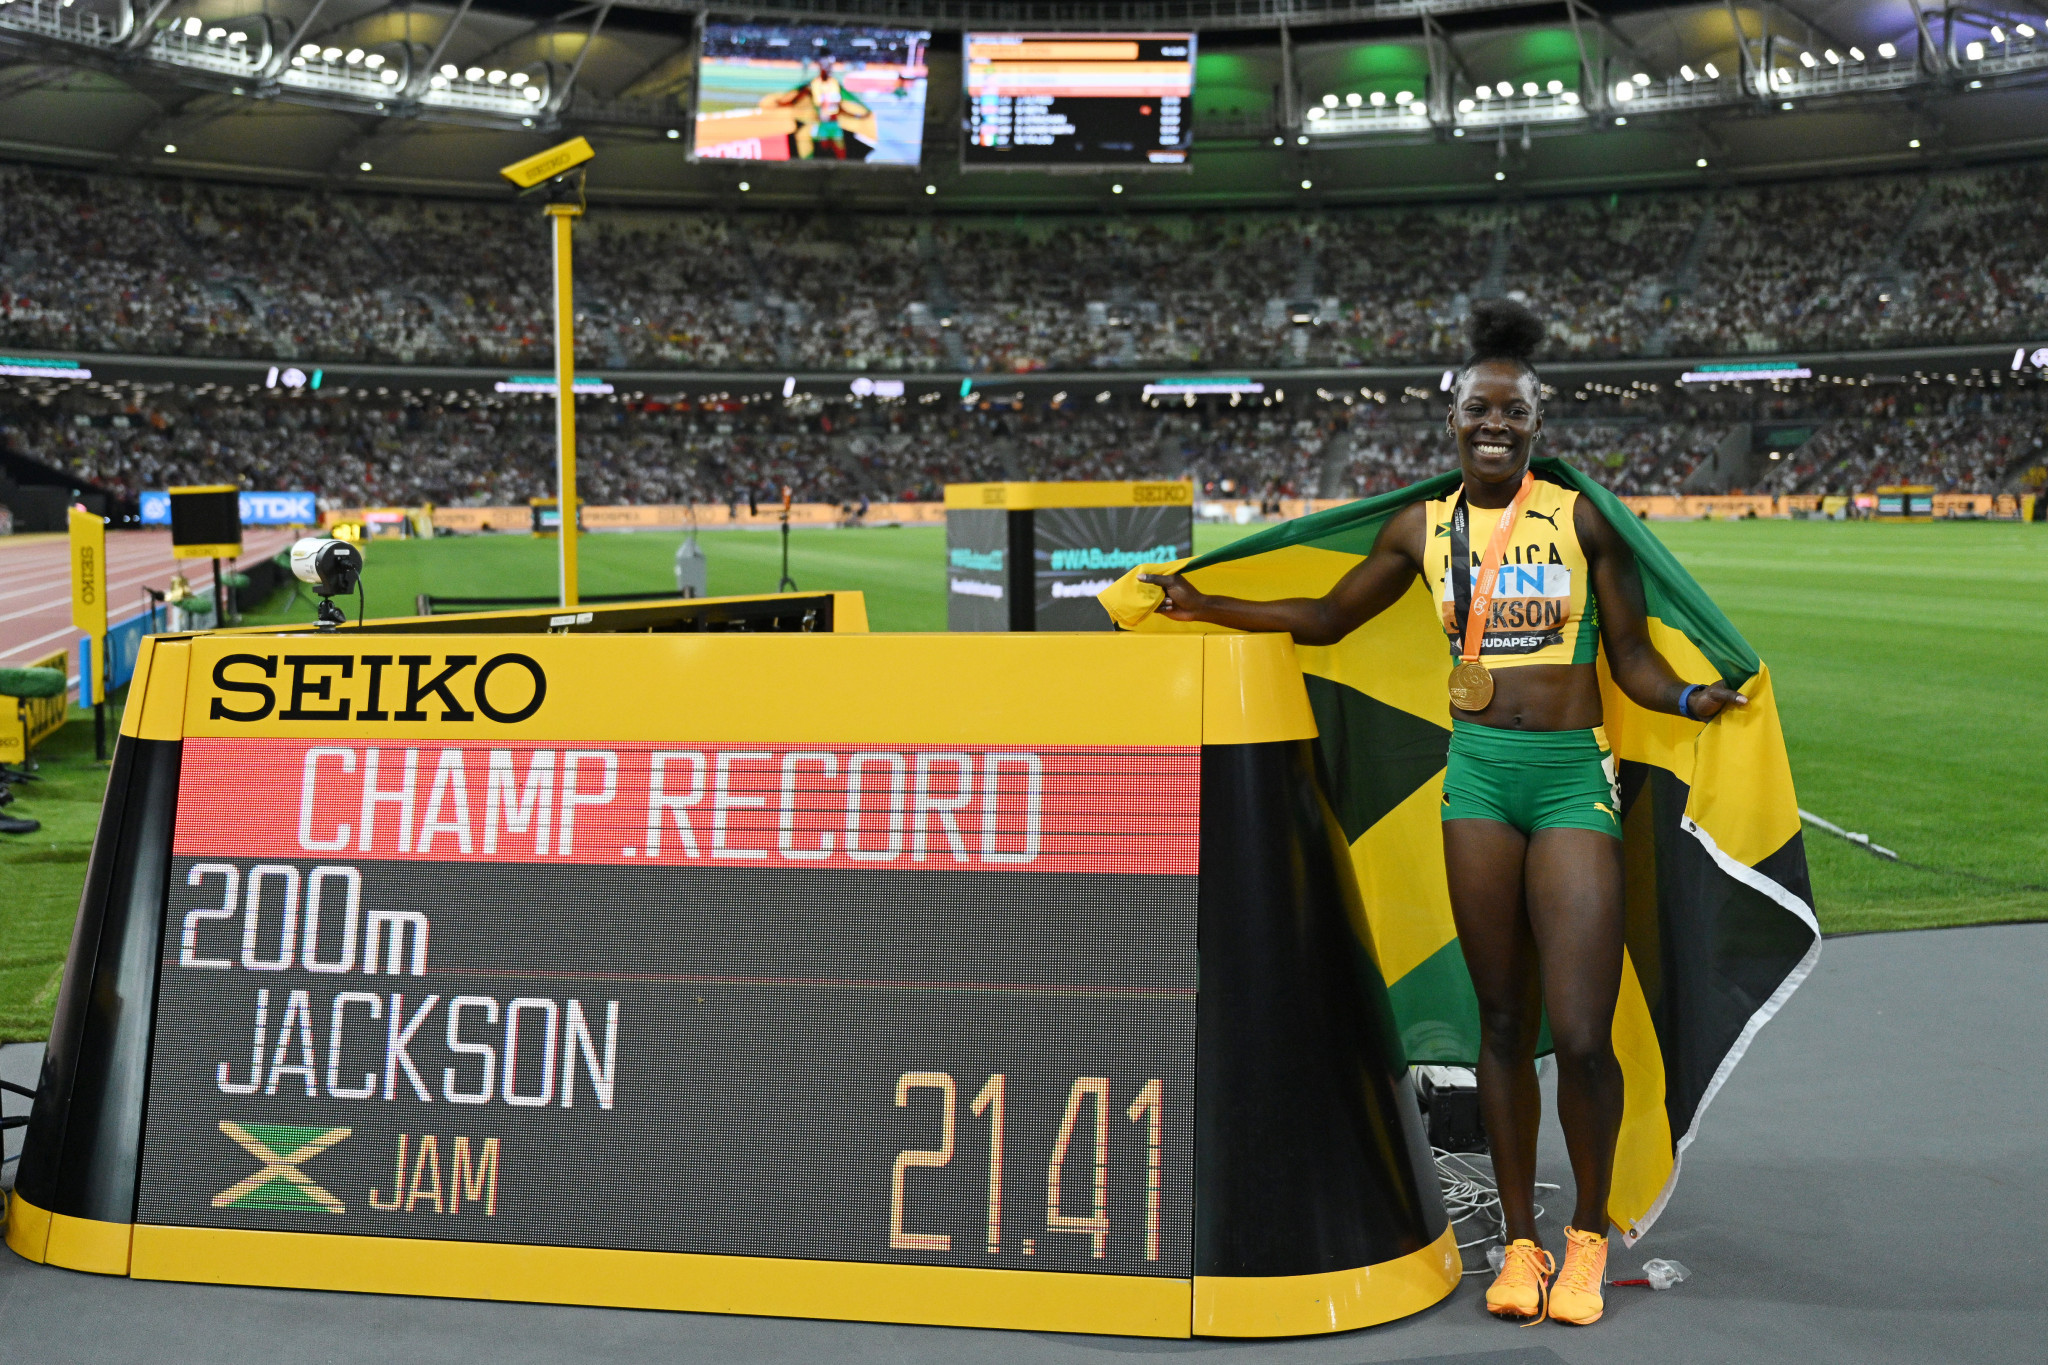 Jamaica's Shericka Jackson defended her women's 200m title in Championships record time of 21.41 ©Getty Images